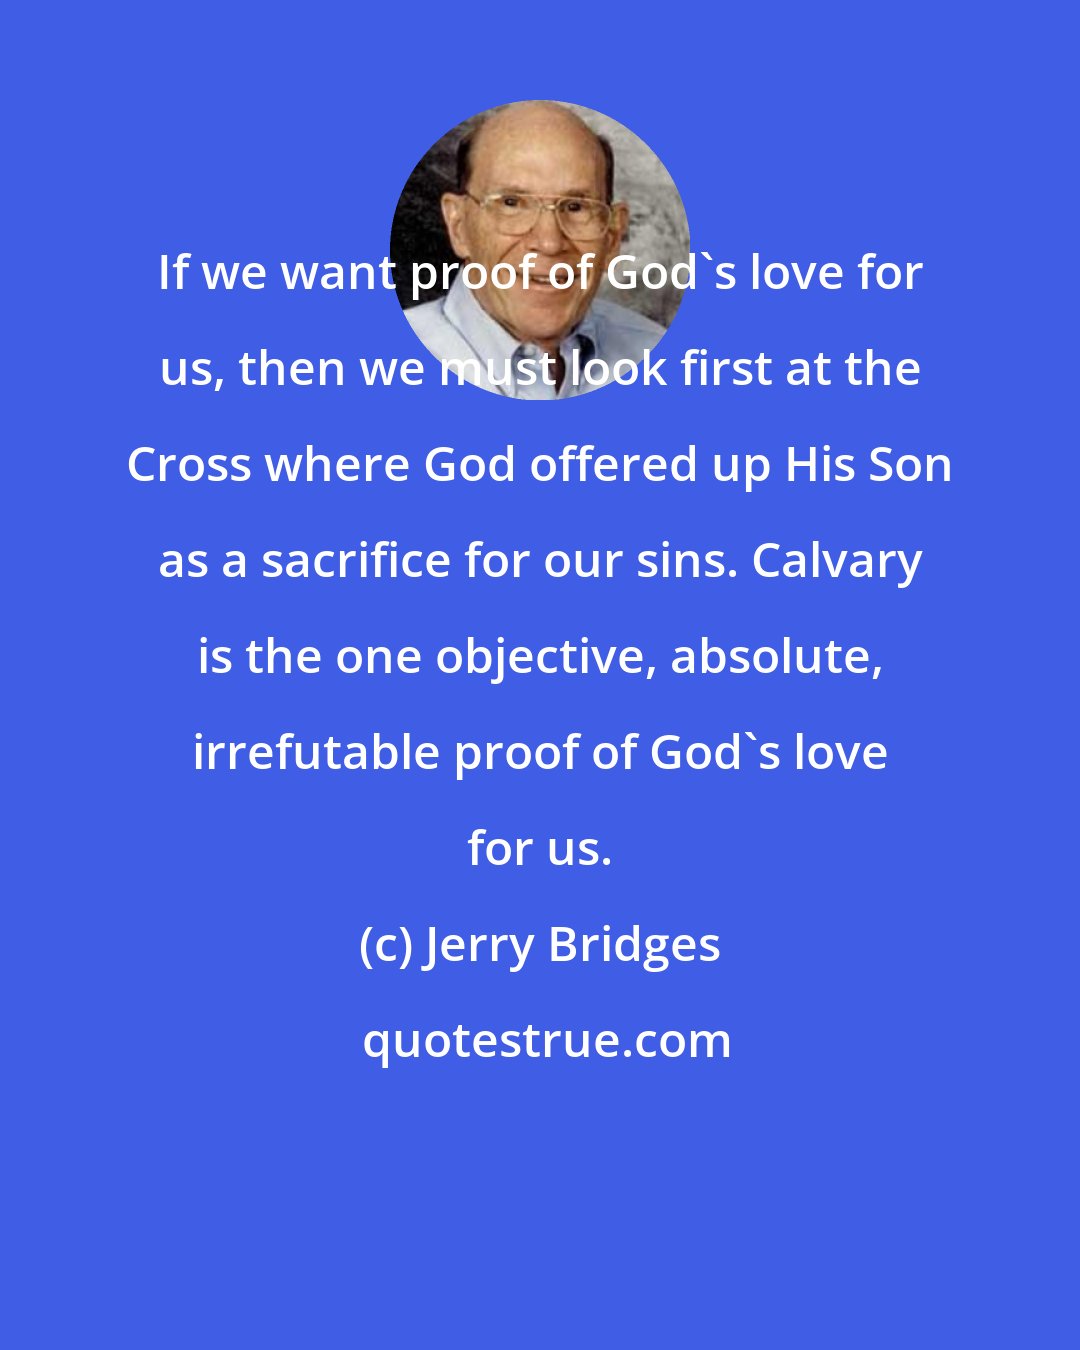 Jerry Bridges: If we want proof of God's love for us, then we must look first at the Cross where God offered up His Son as a sacrifice for our sins. Calvary is the one objective, absolute, irrefutable proof of God's love for us.